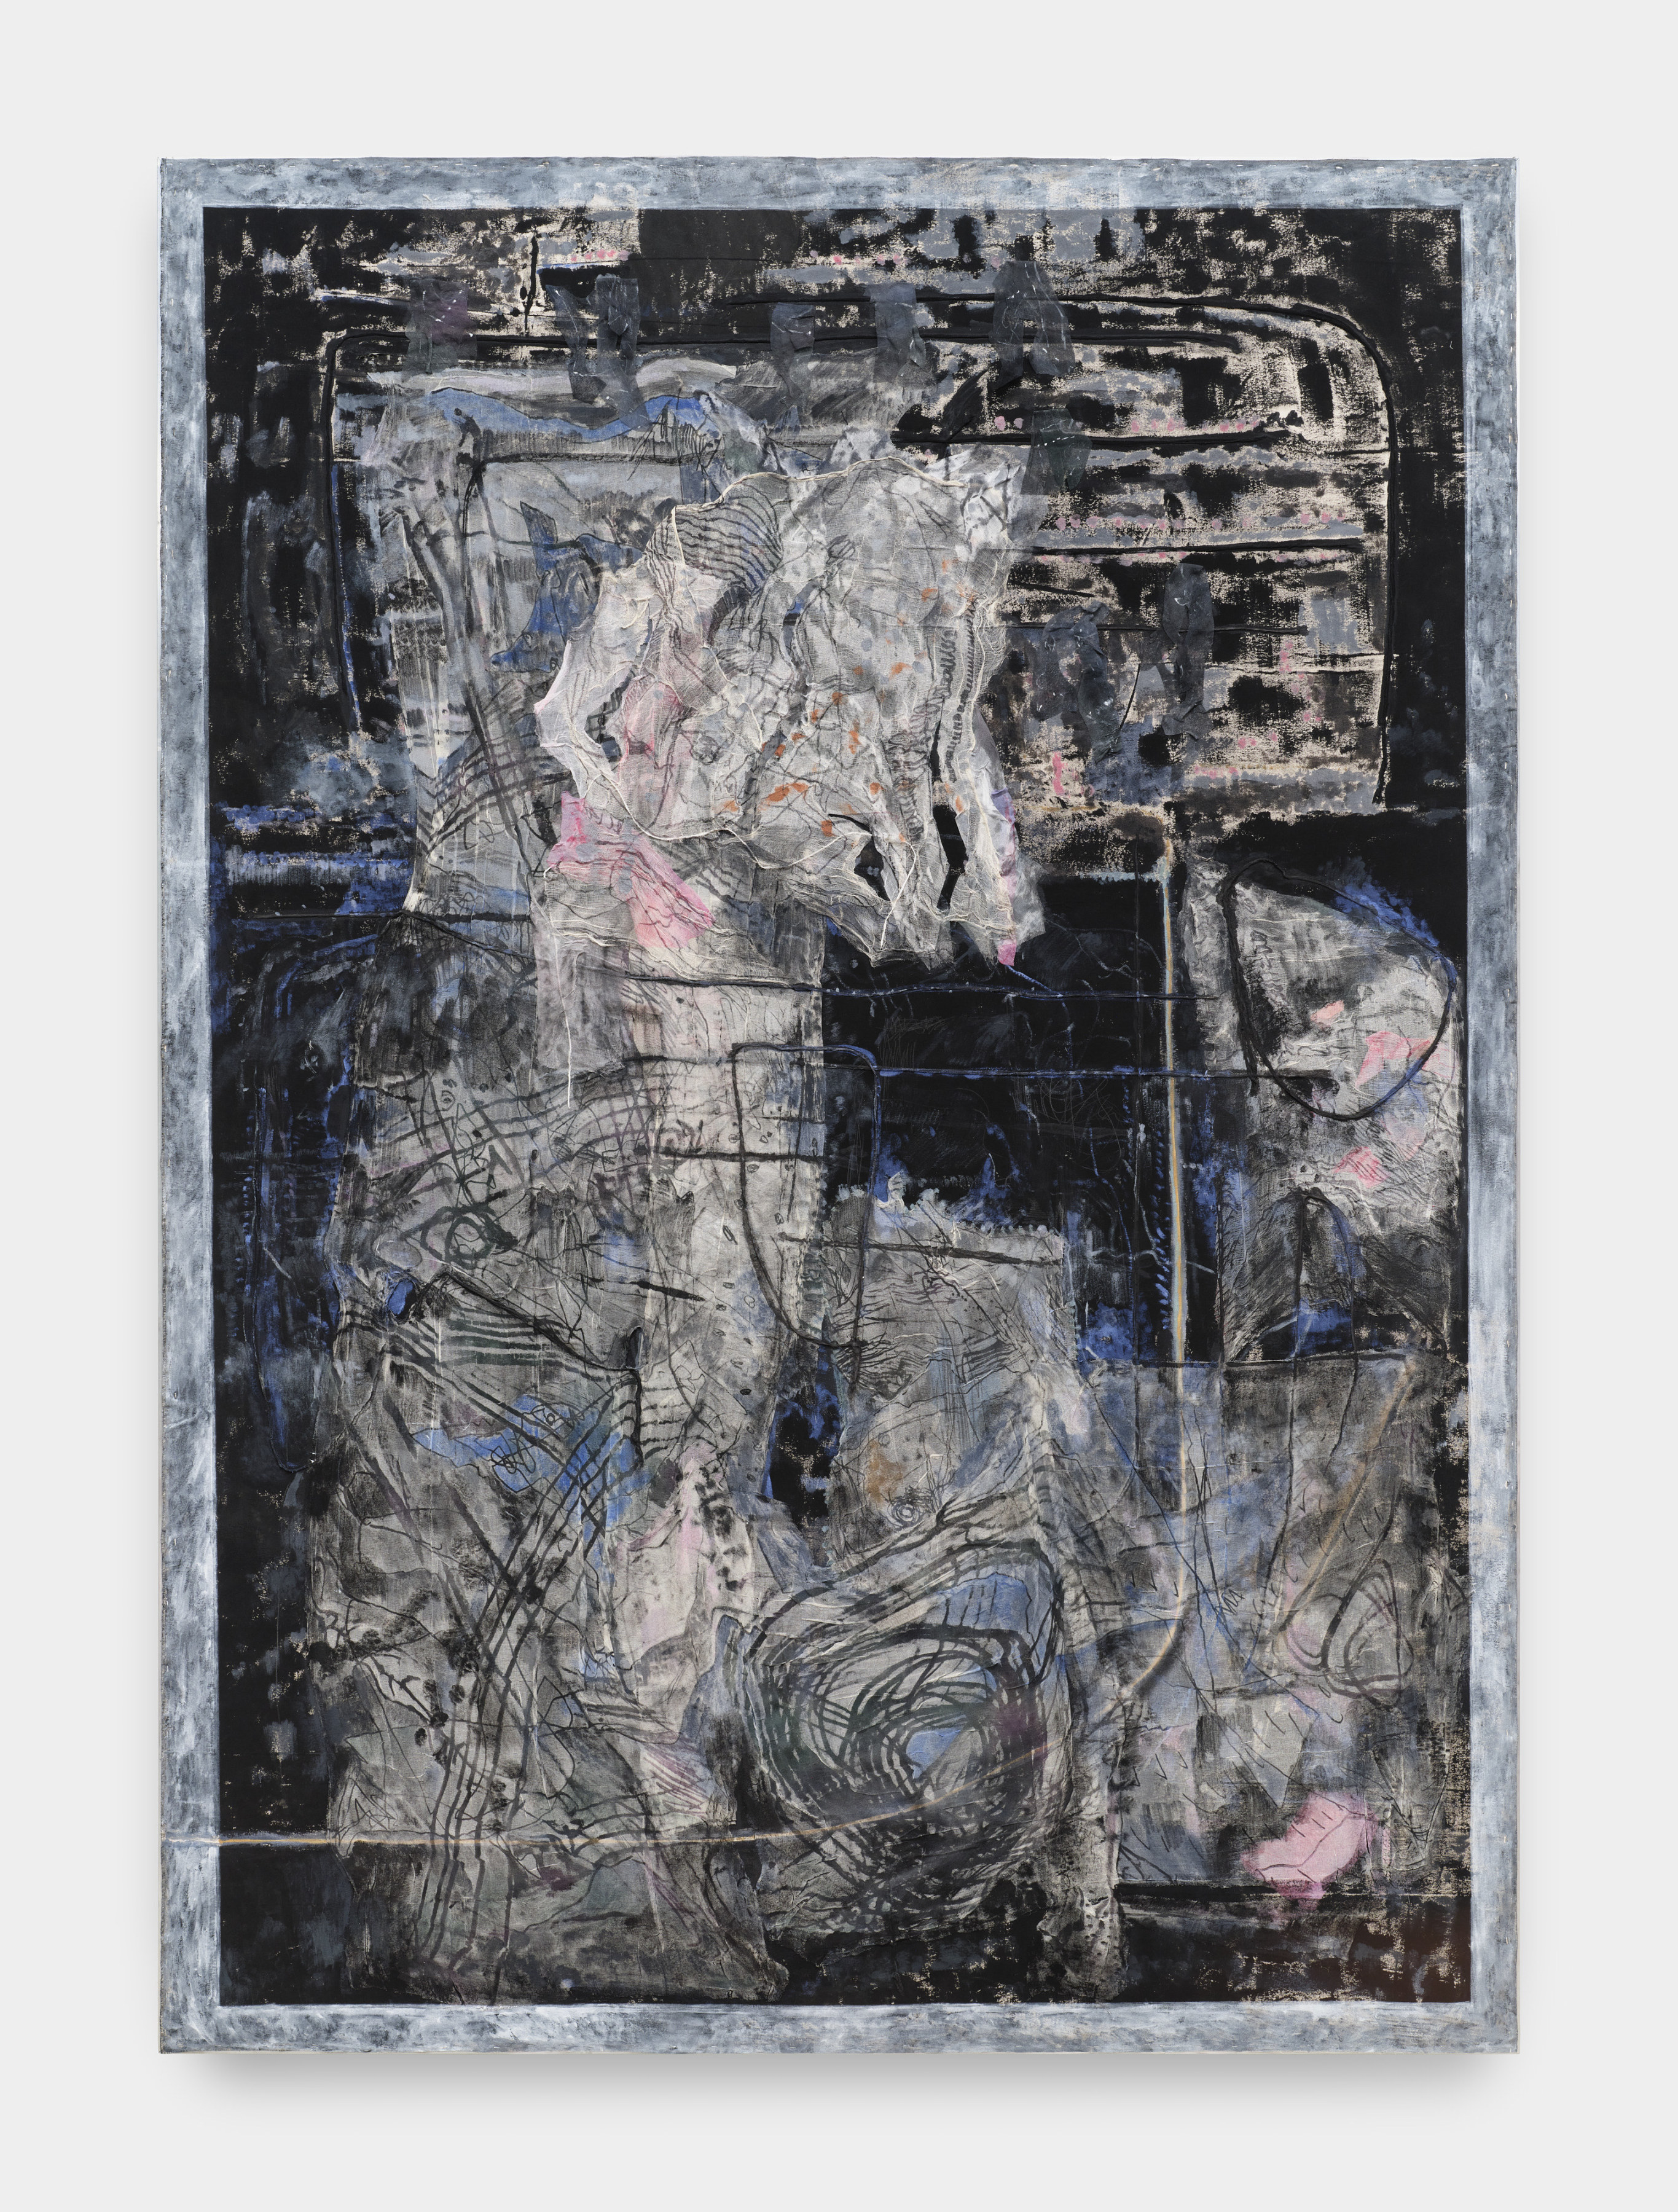 A textured painting with black, blue and grey swatches of color layered with gauze and line drawings.